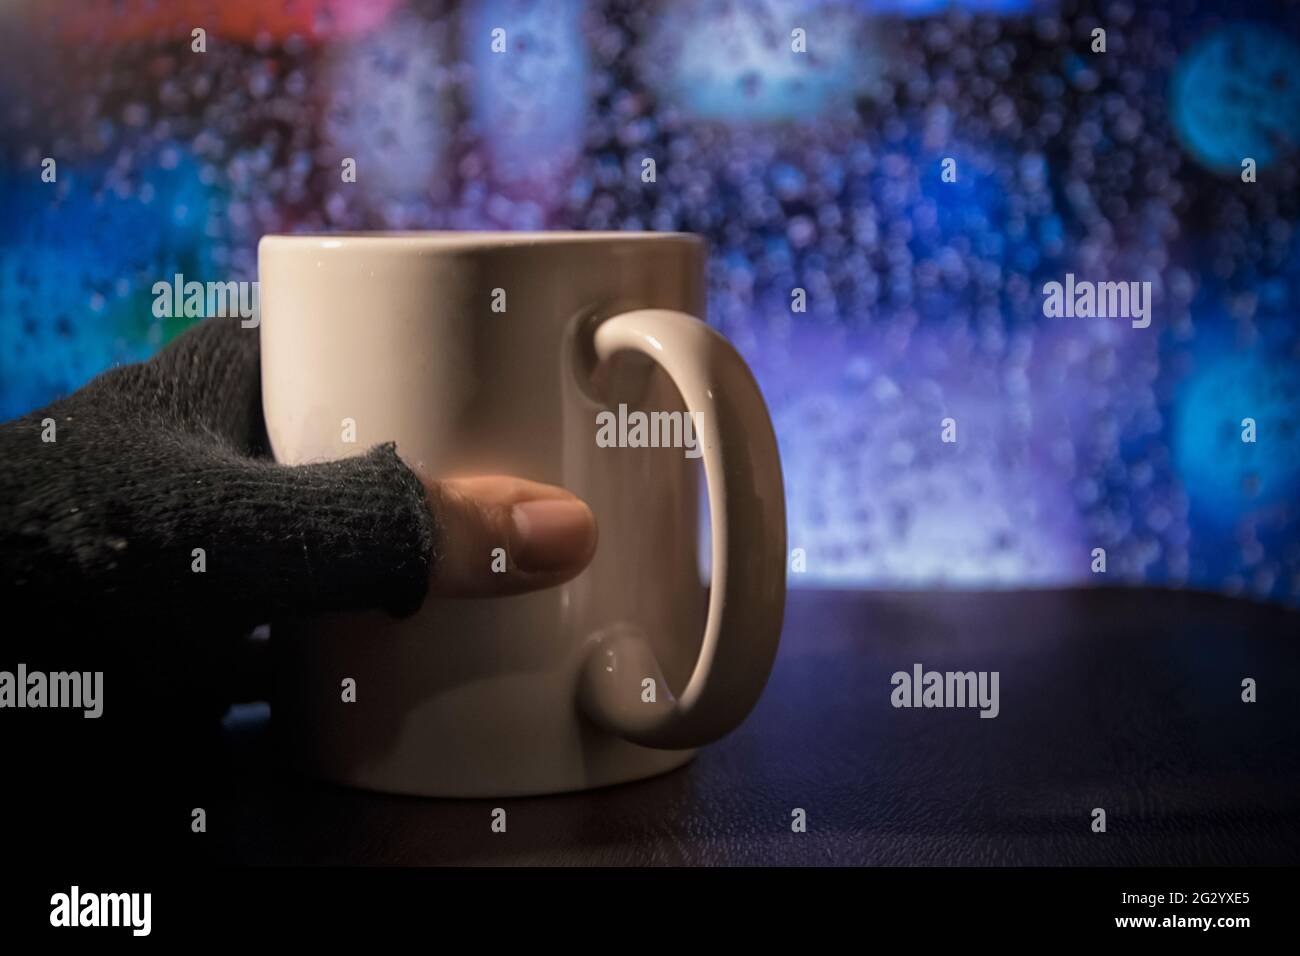 A hand with glove with a cup during the rain Stock Photo